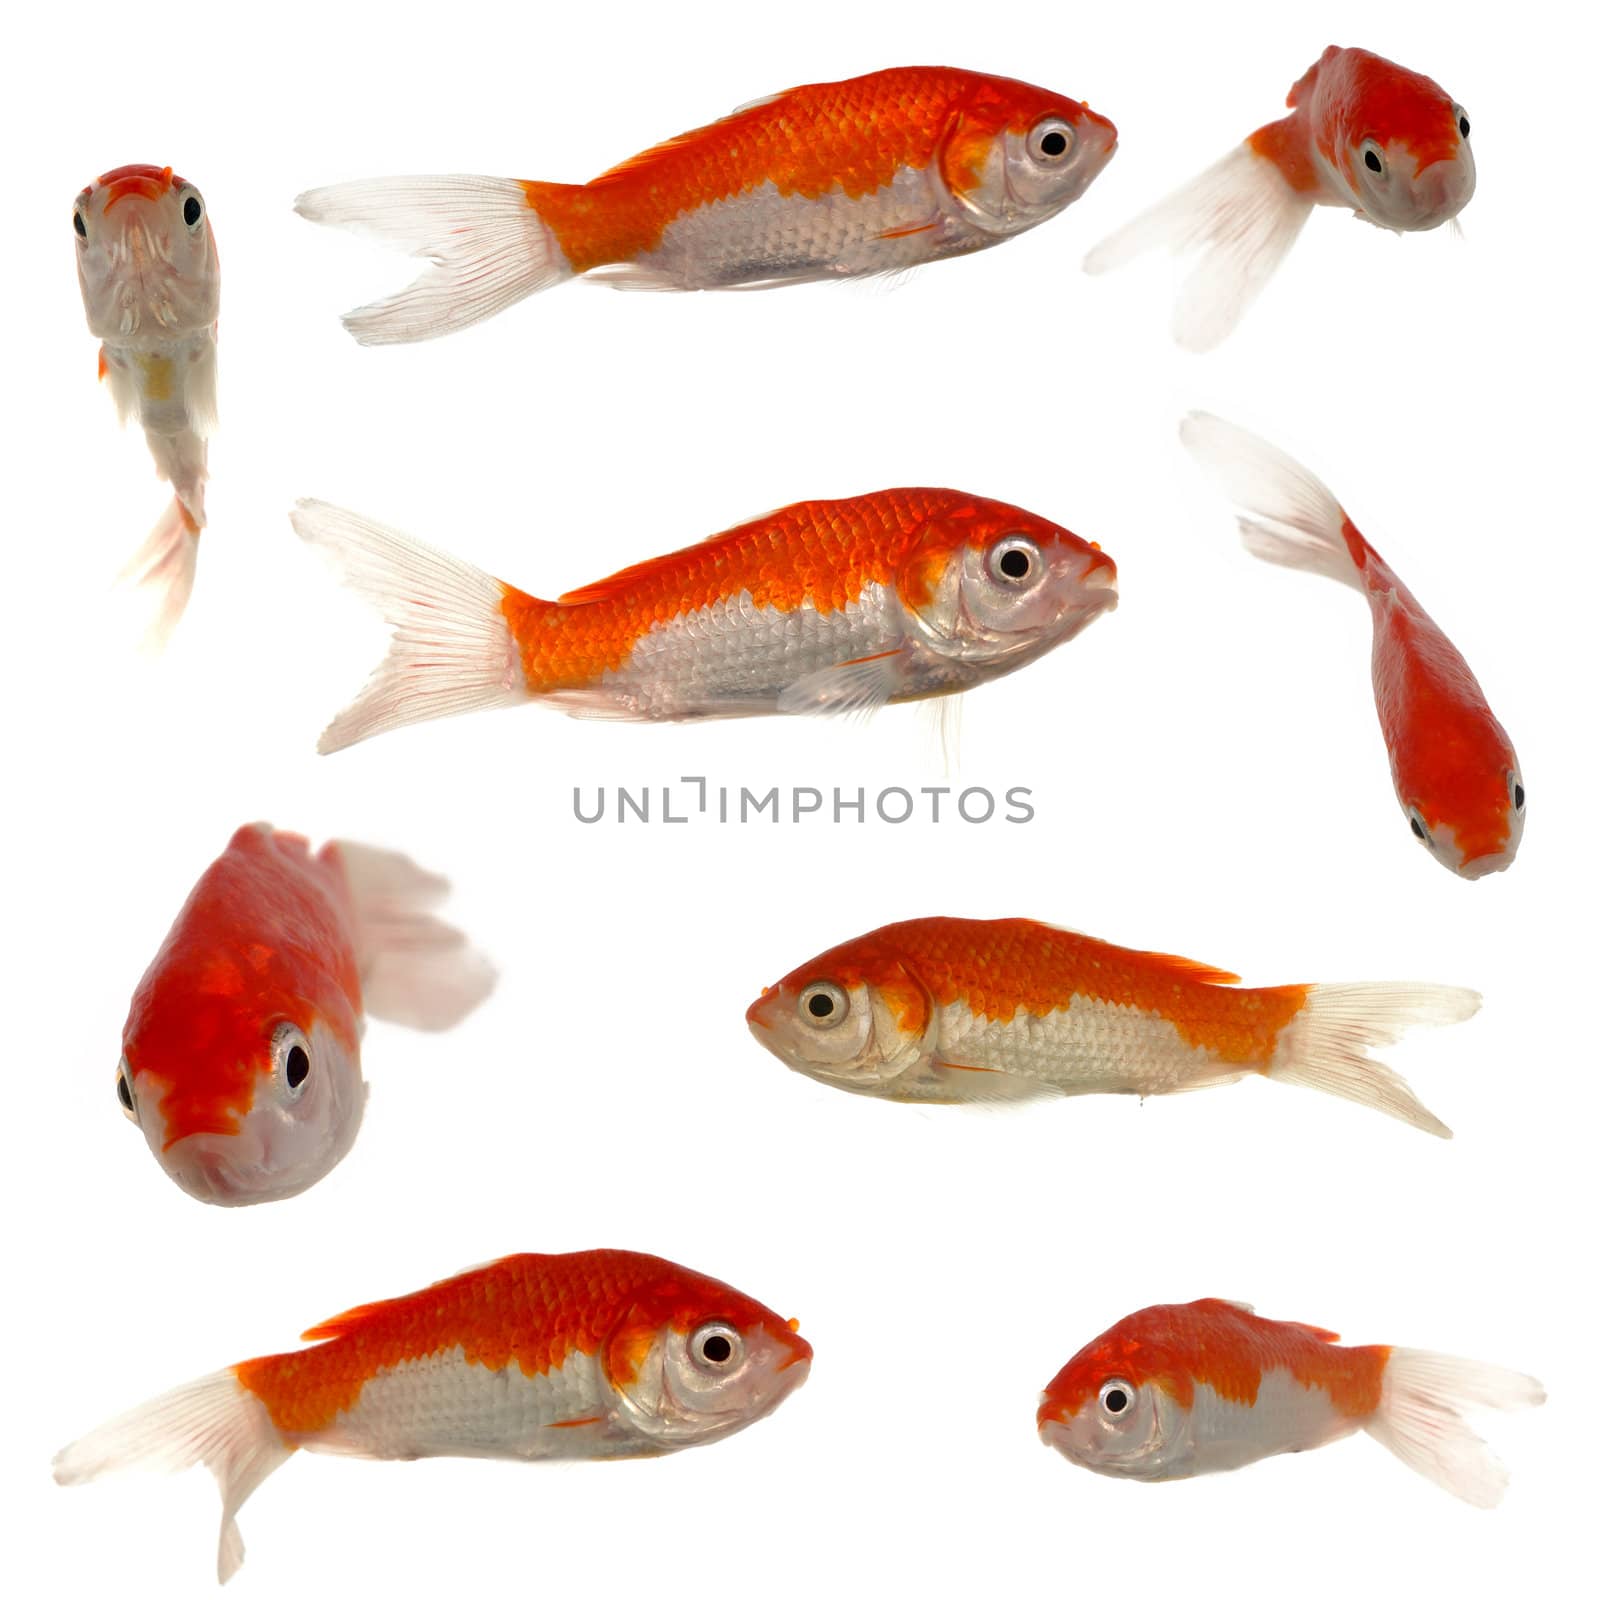 Collection of goldfish. Resolution 3000 x 3000 pixels. On clean white background.